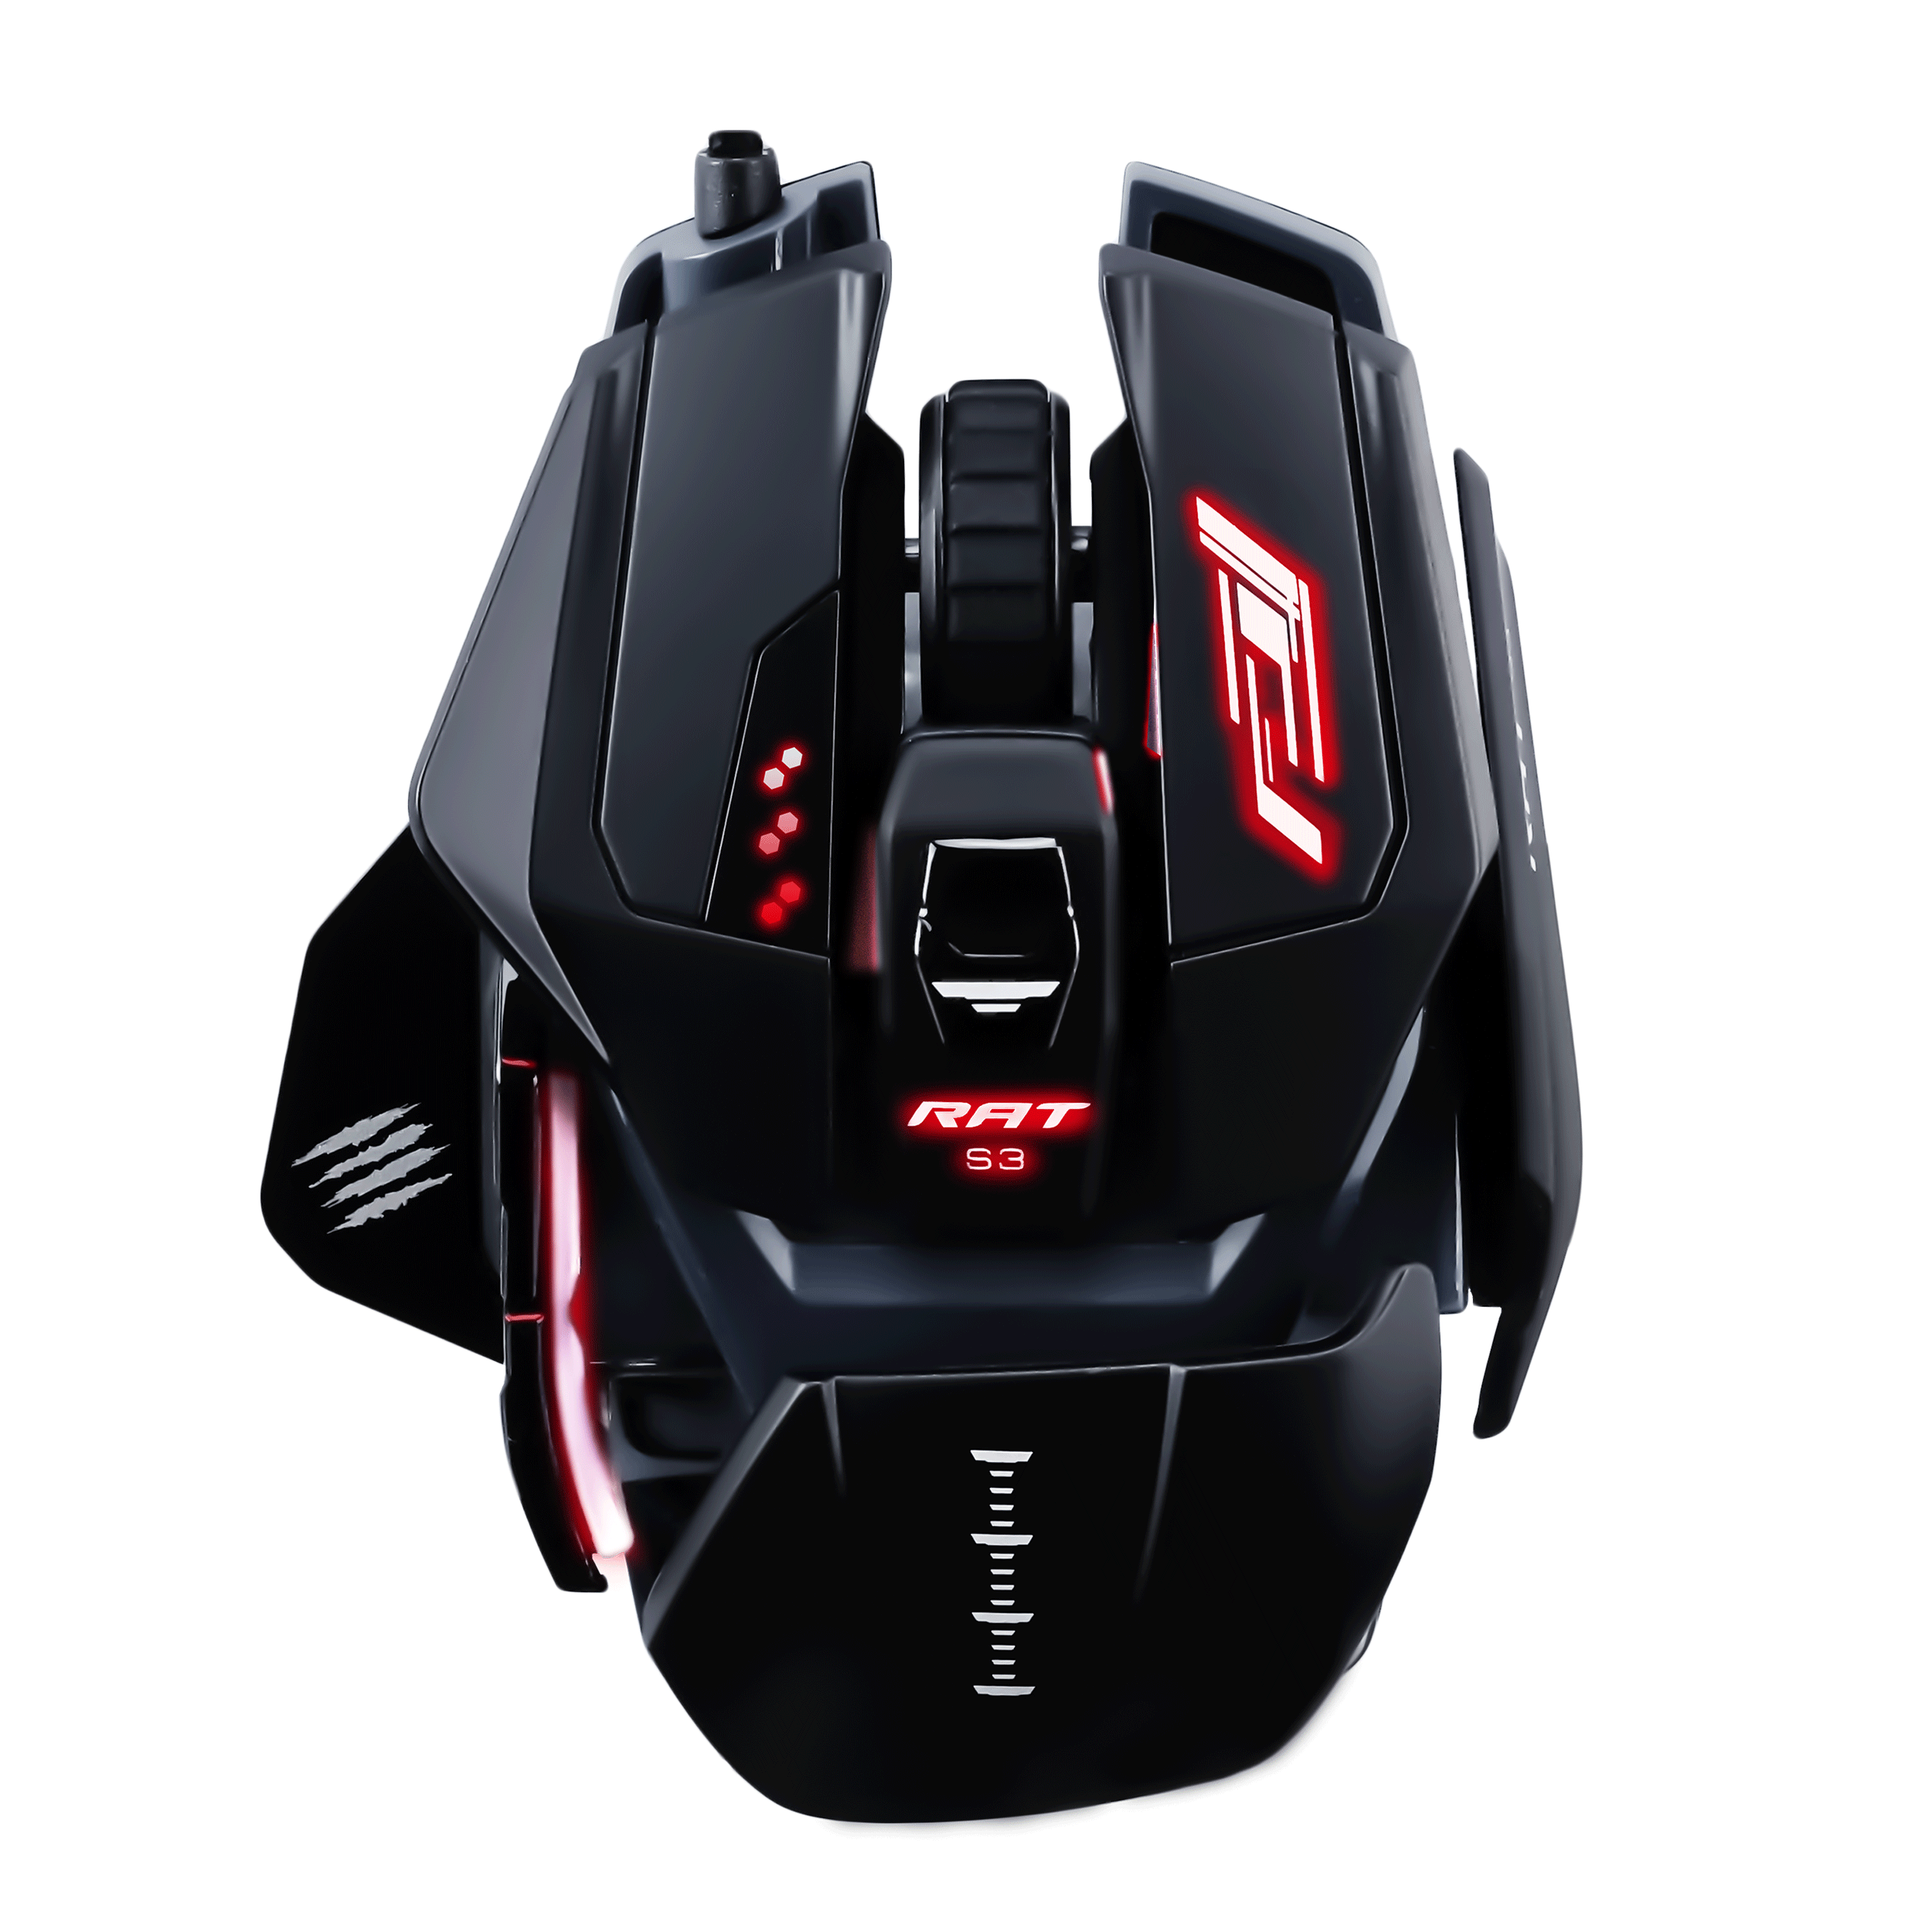 CATZ Pro Schwarz Gaming R.A.T. MAD Mouse, S3